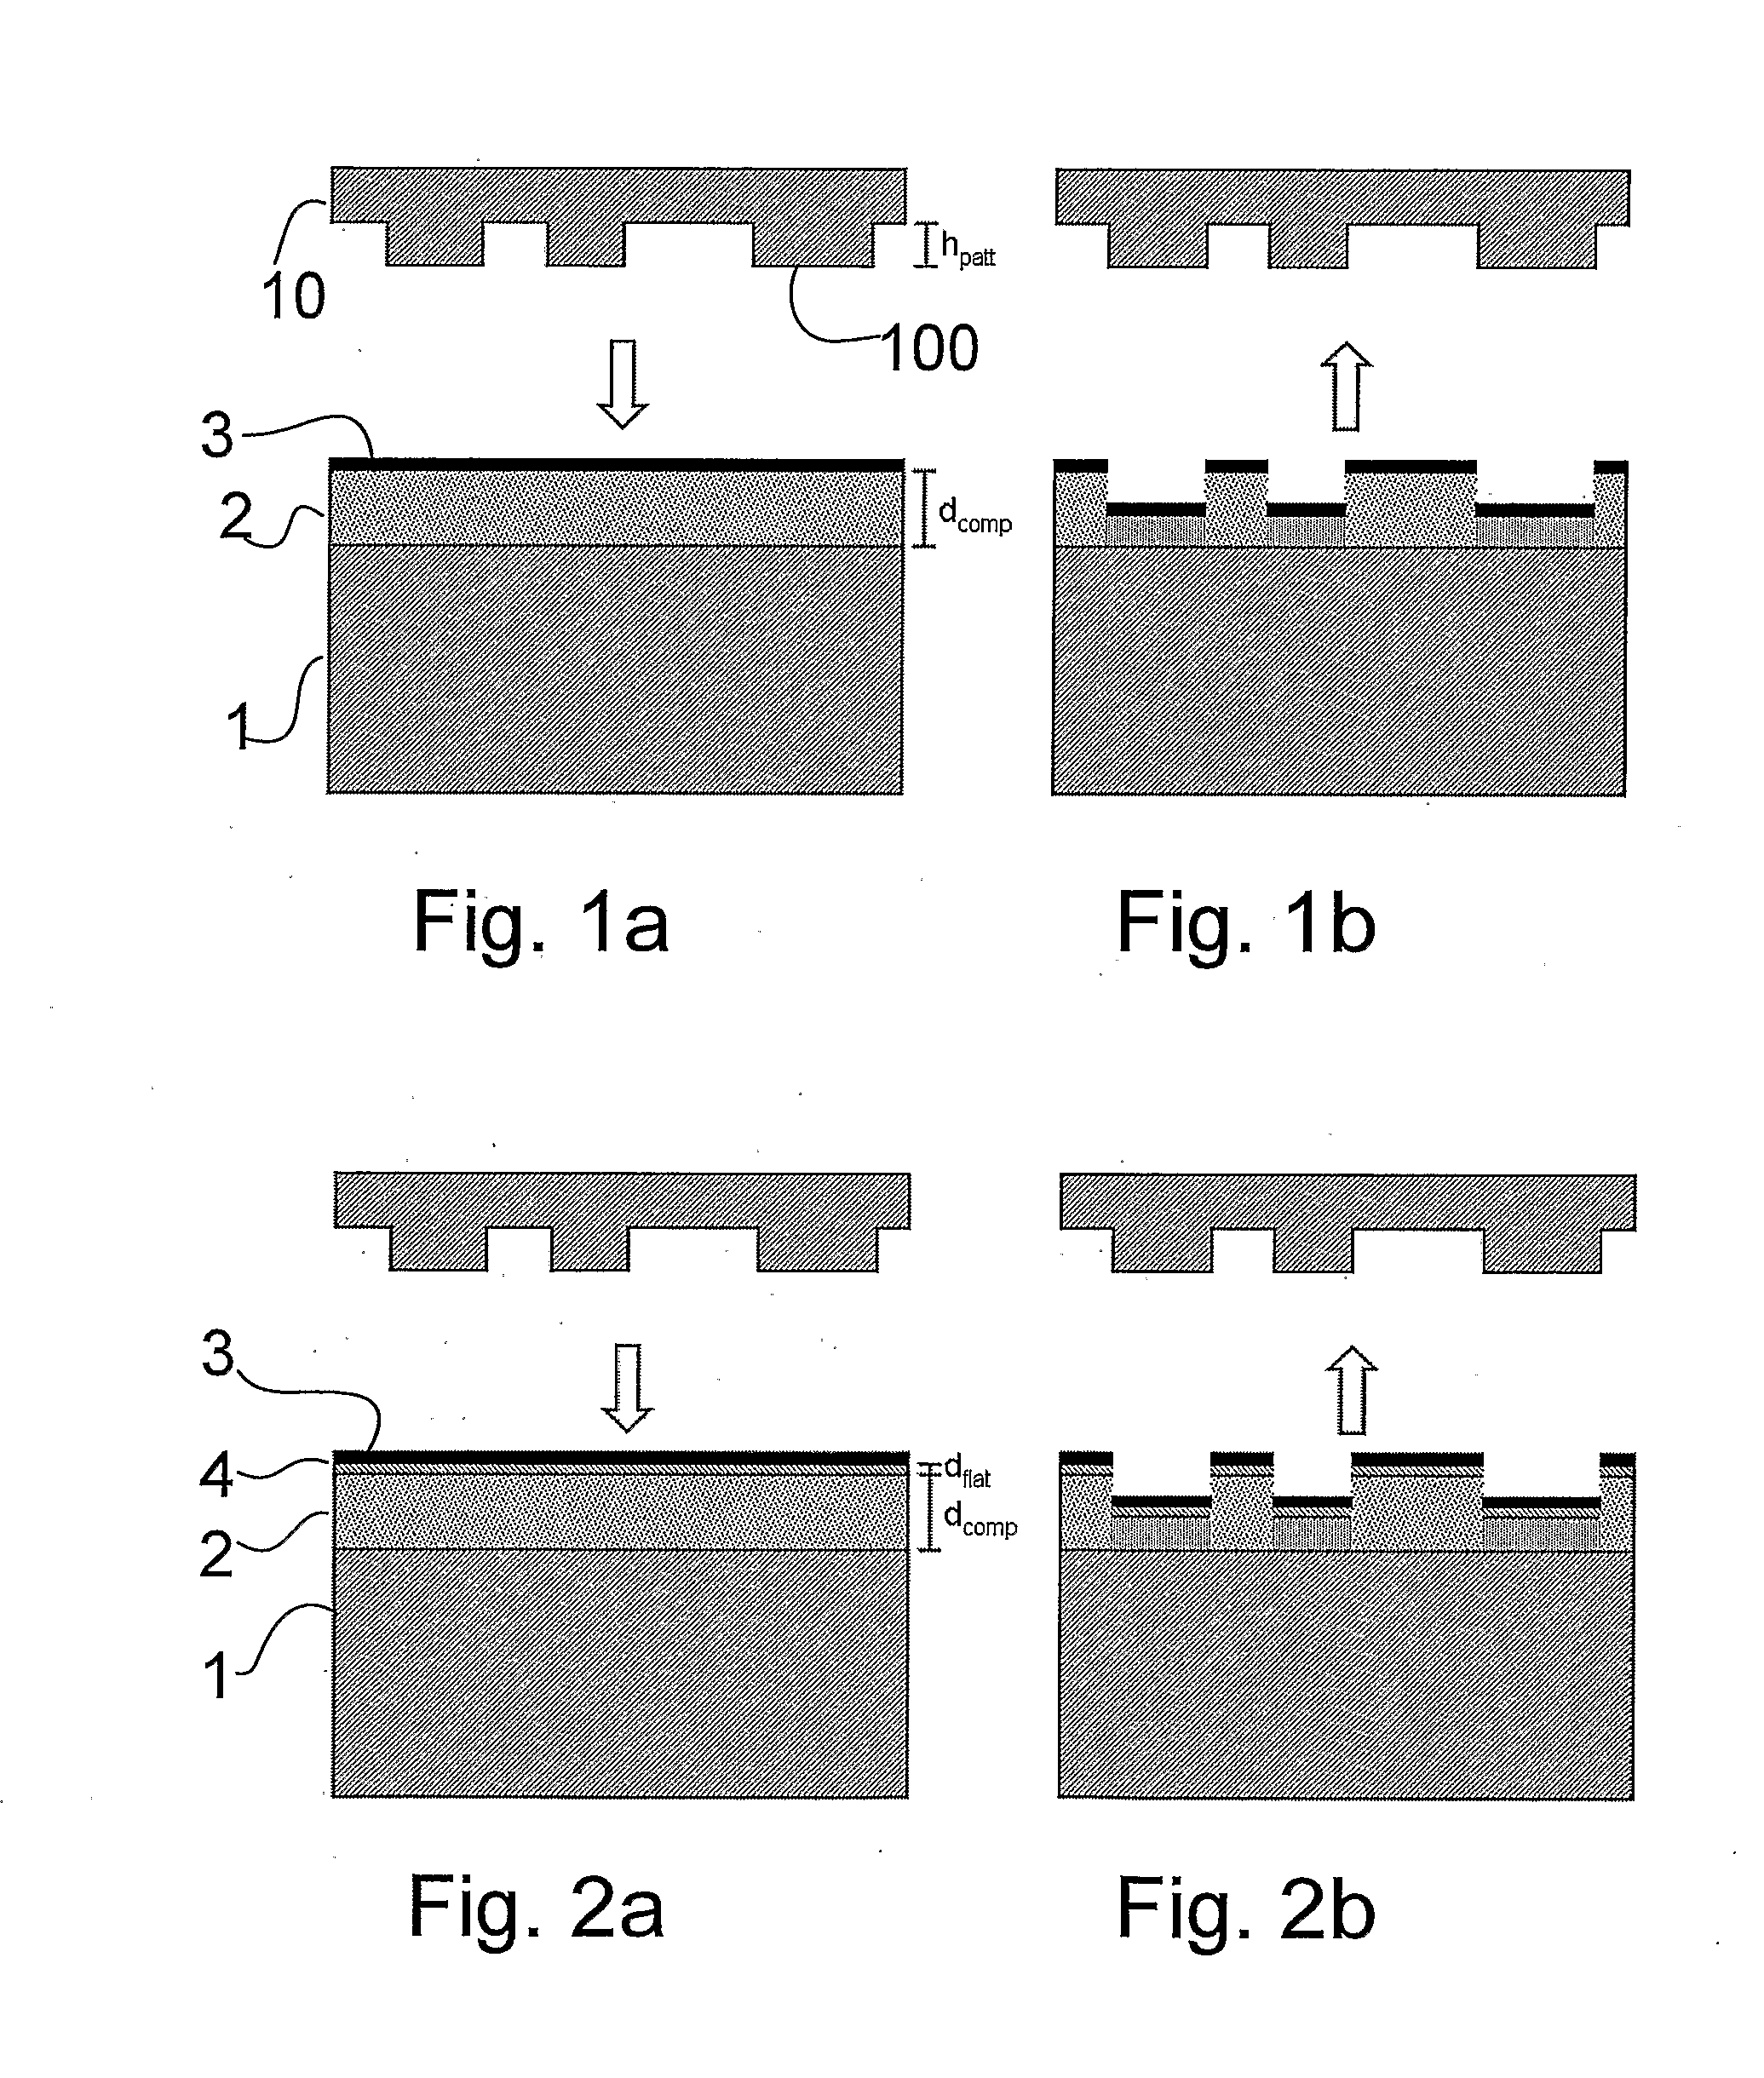 Method and Apparatus for Patterning a Conductive Layer, and a Device Produced Thereby